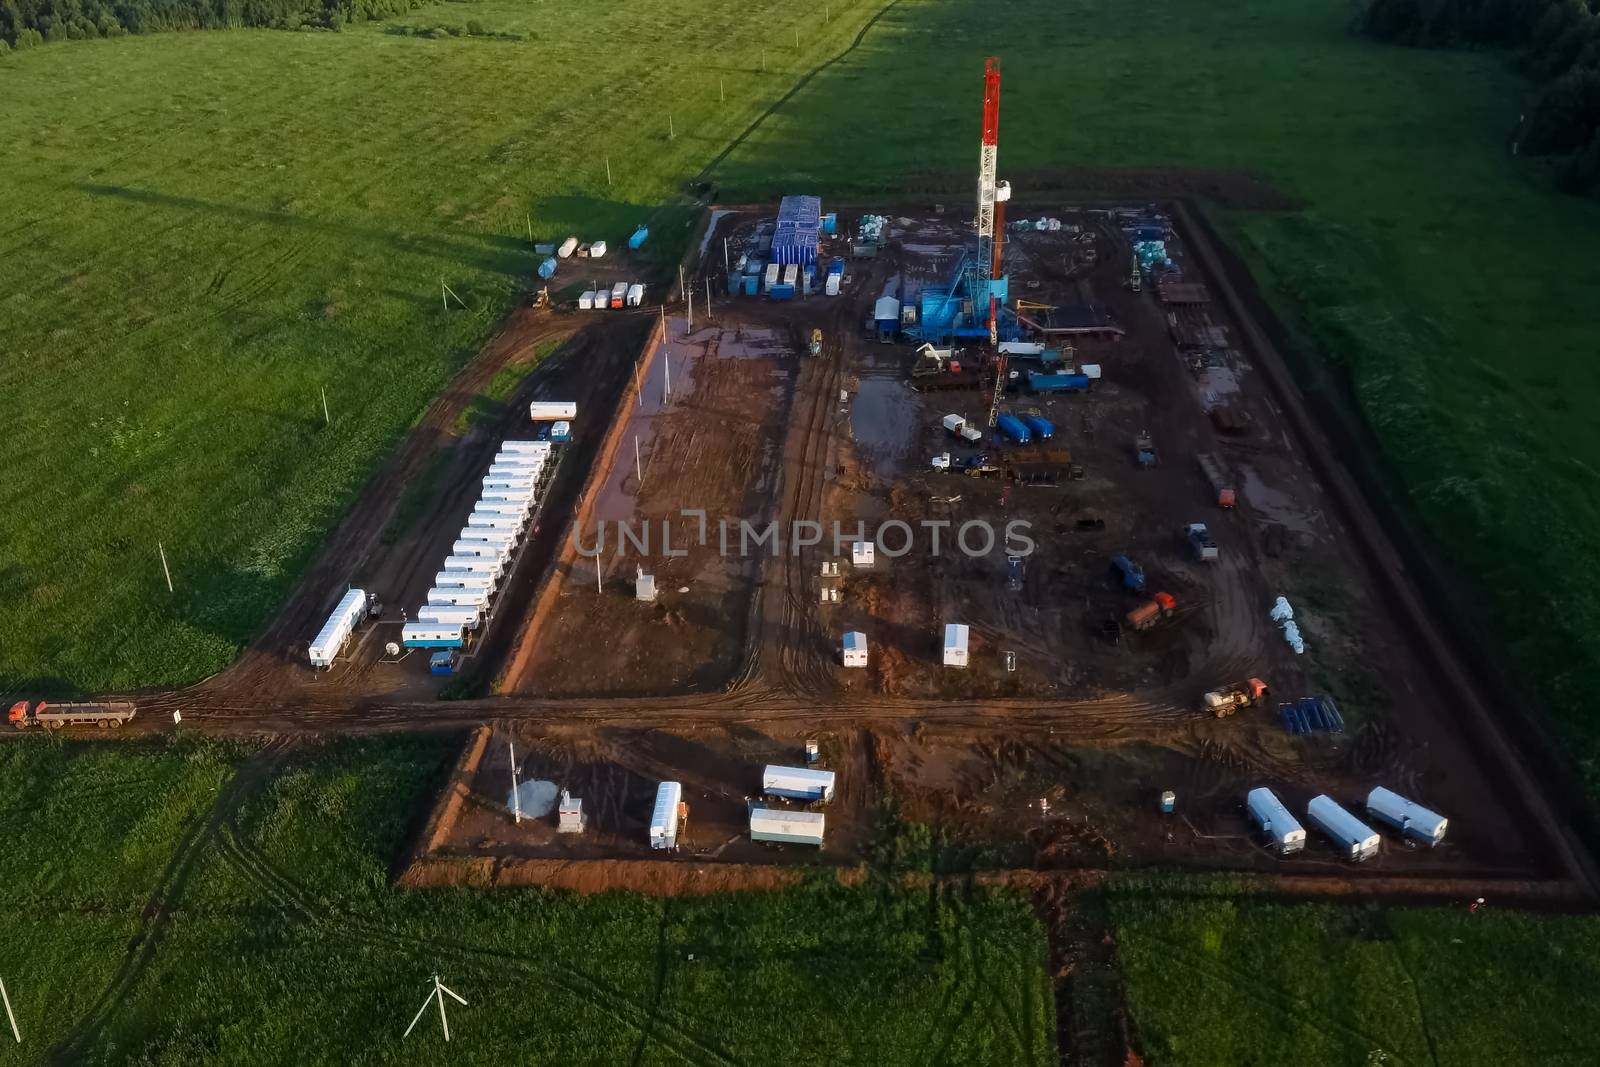 Drilling rig for oil and gas well drilling. Drilling rig for oil and gas well drilling.